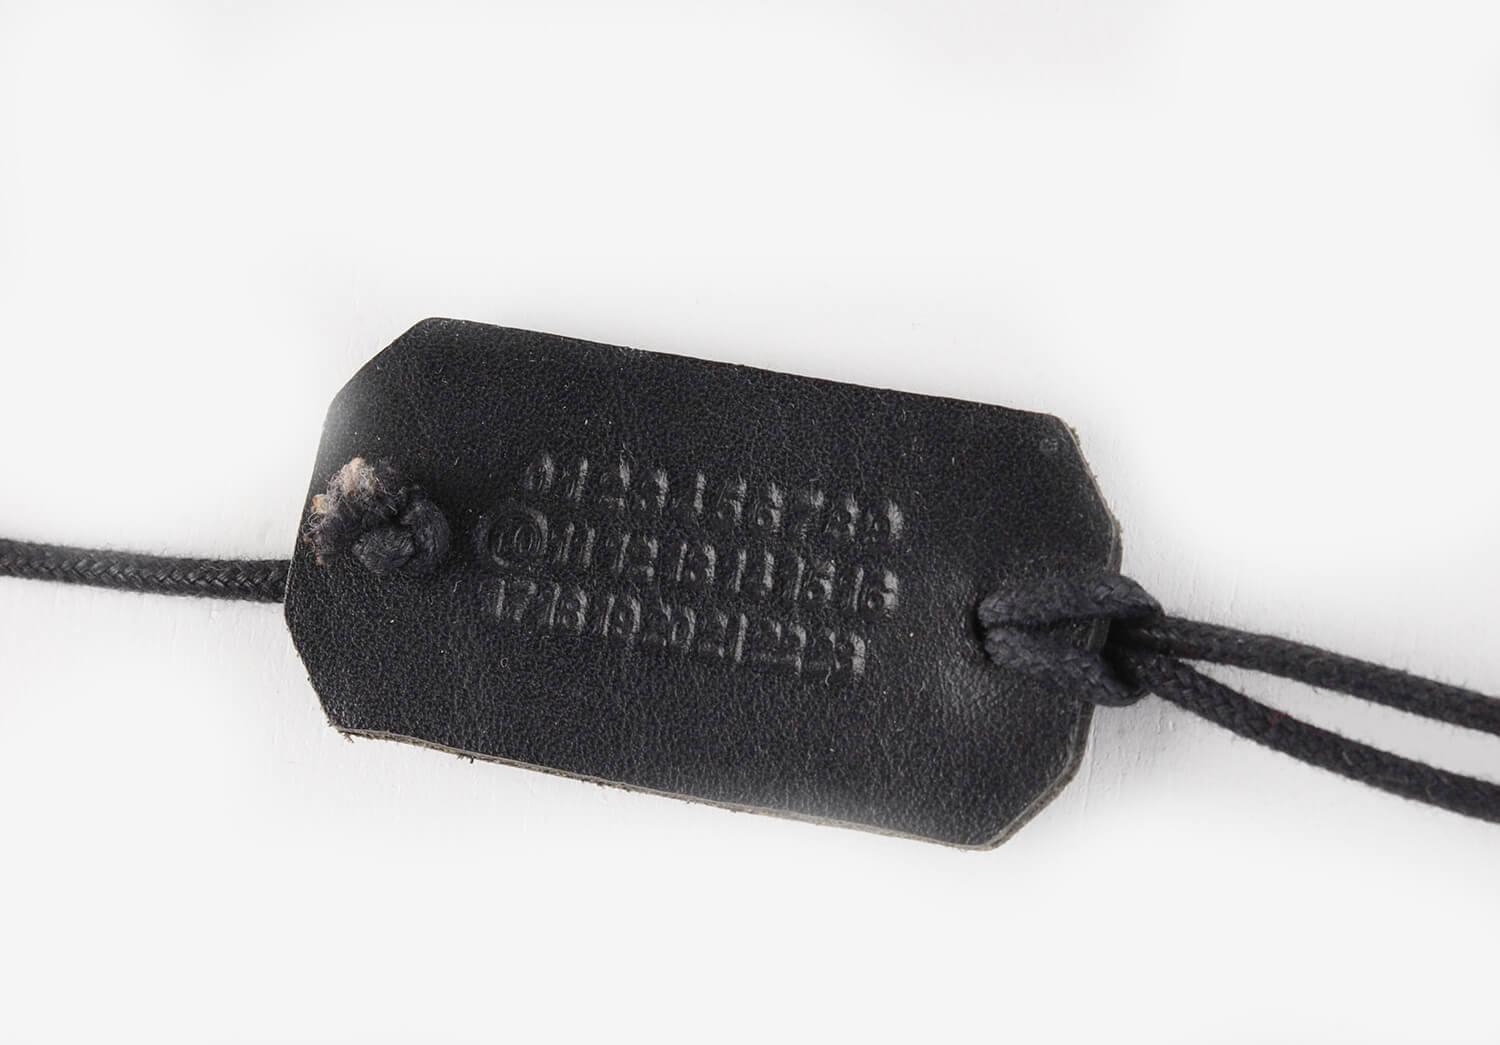 Item for sale is 100% genuine Martin Margiela Army Style AW04 Necklace
Color: Black
(An actual color may a bit vary due to individual computer screen interpretation)
Material: Leather
Tag size: One Size
This necklace is great quality item. Rate 9 of